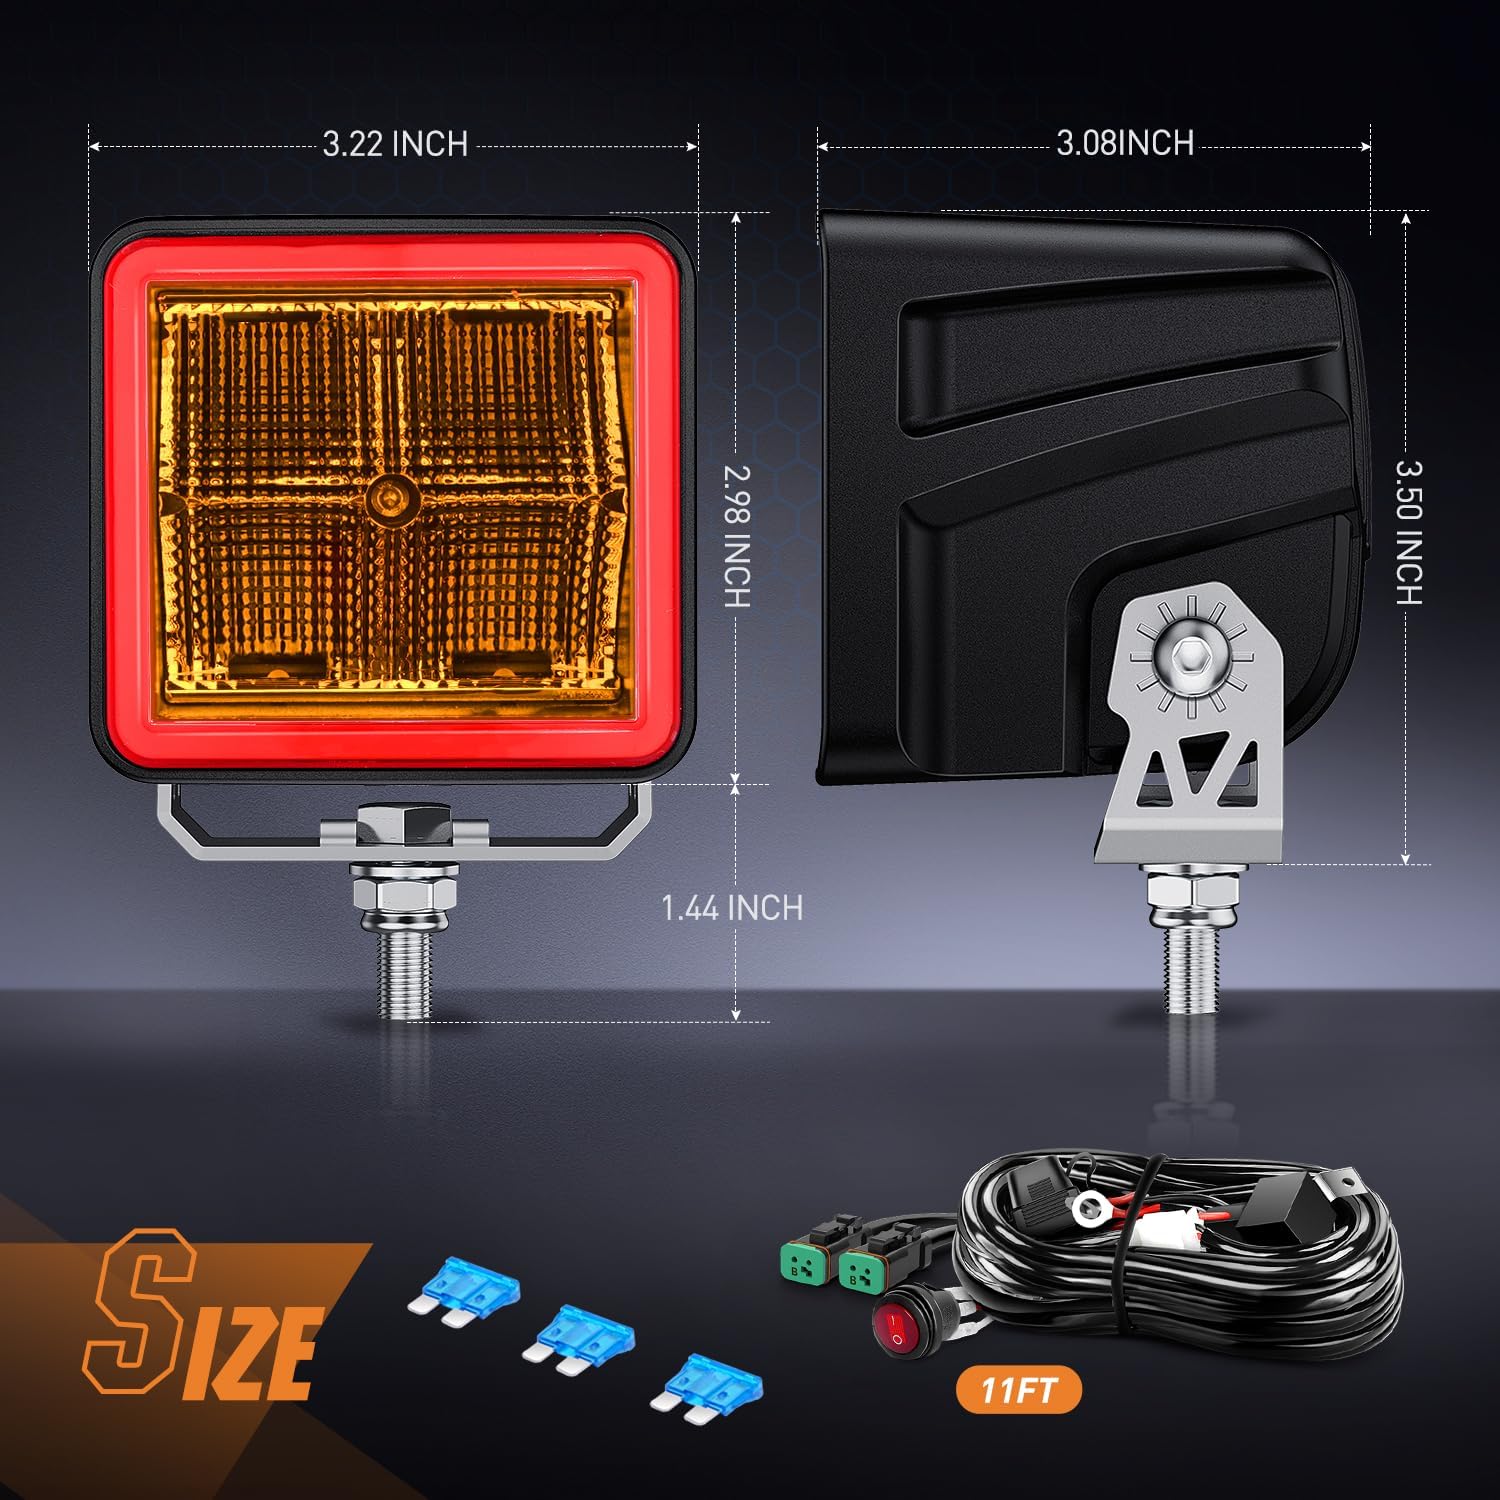 3" 20W 1240LM Amber DRL Spot Cube LED Pods (Pair) | 16AWG DT Wire Nilight